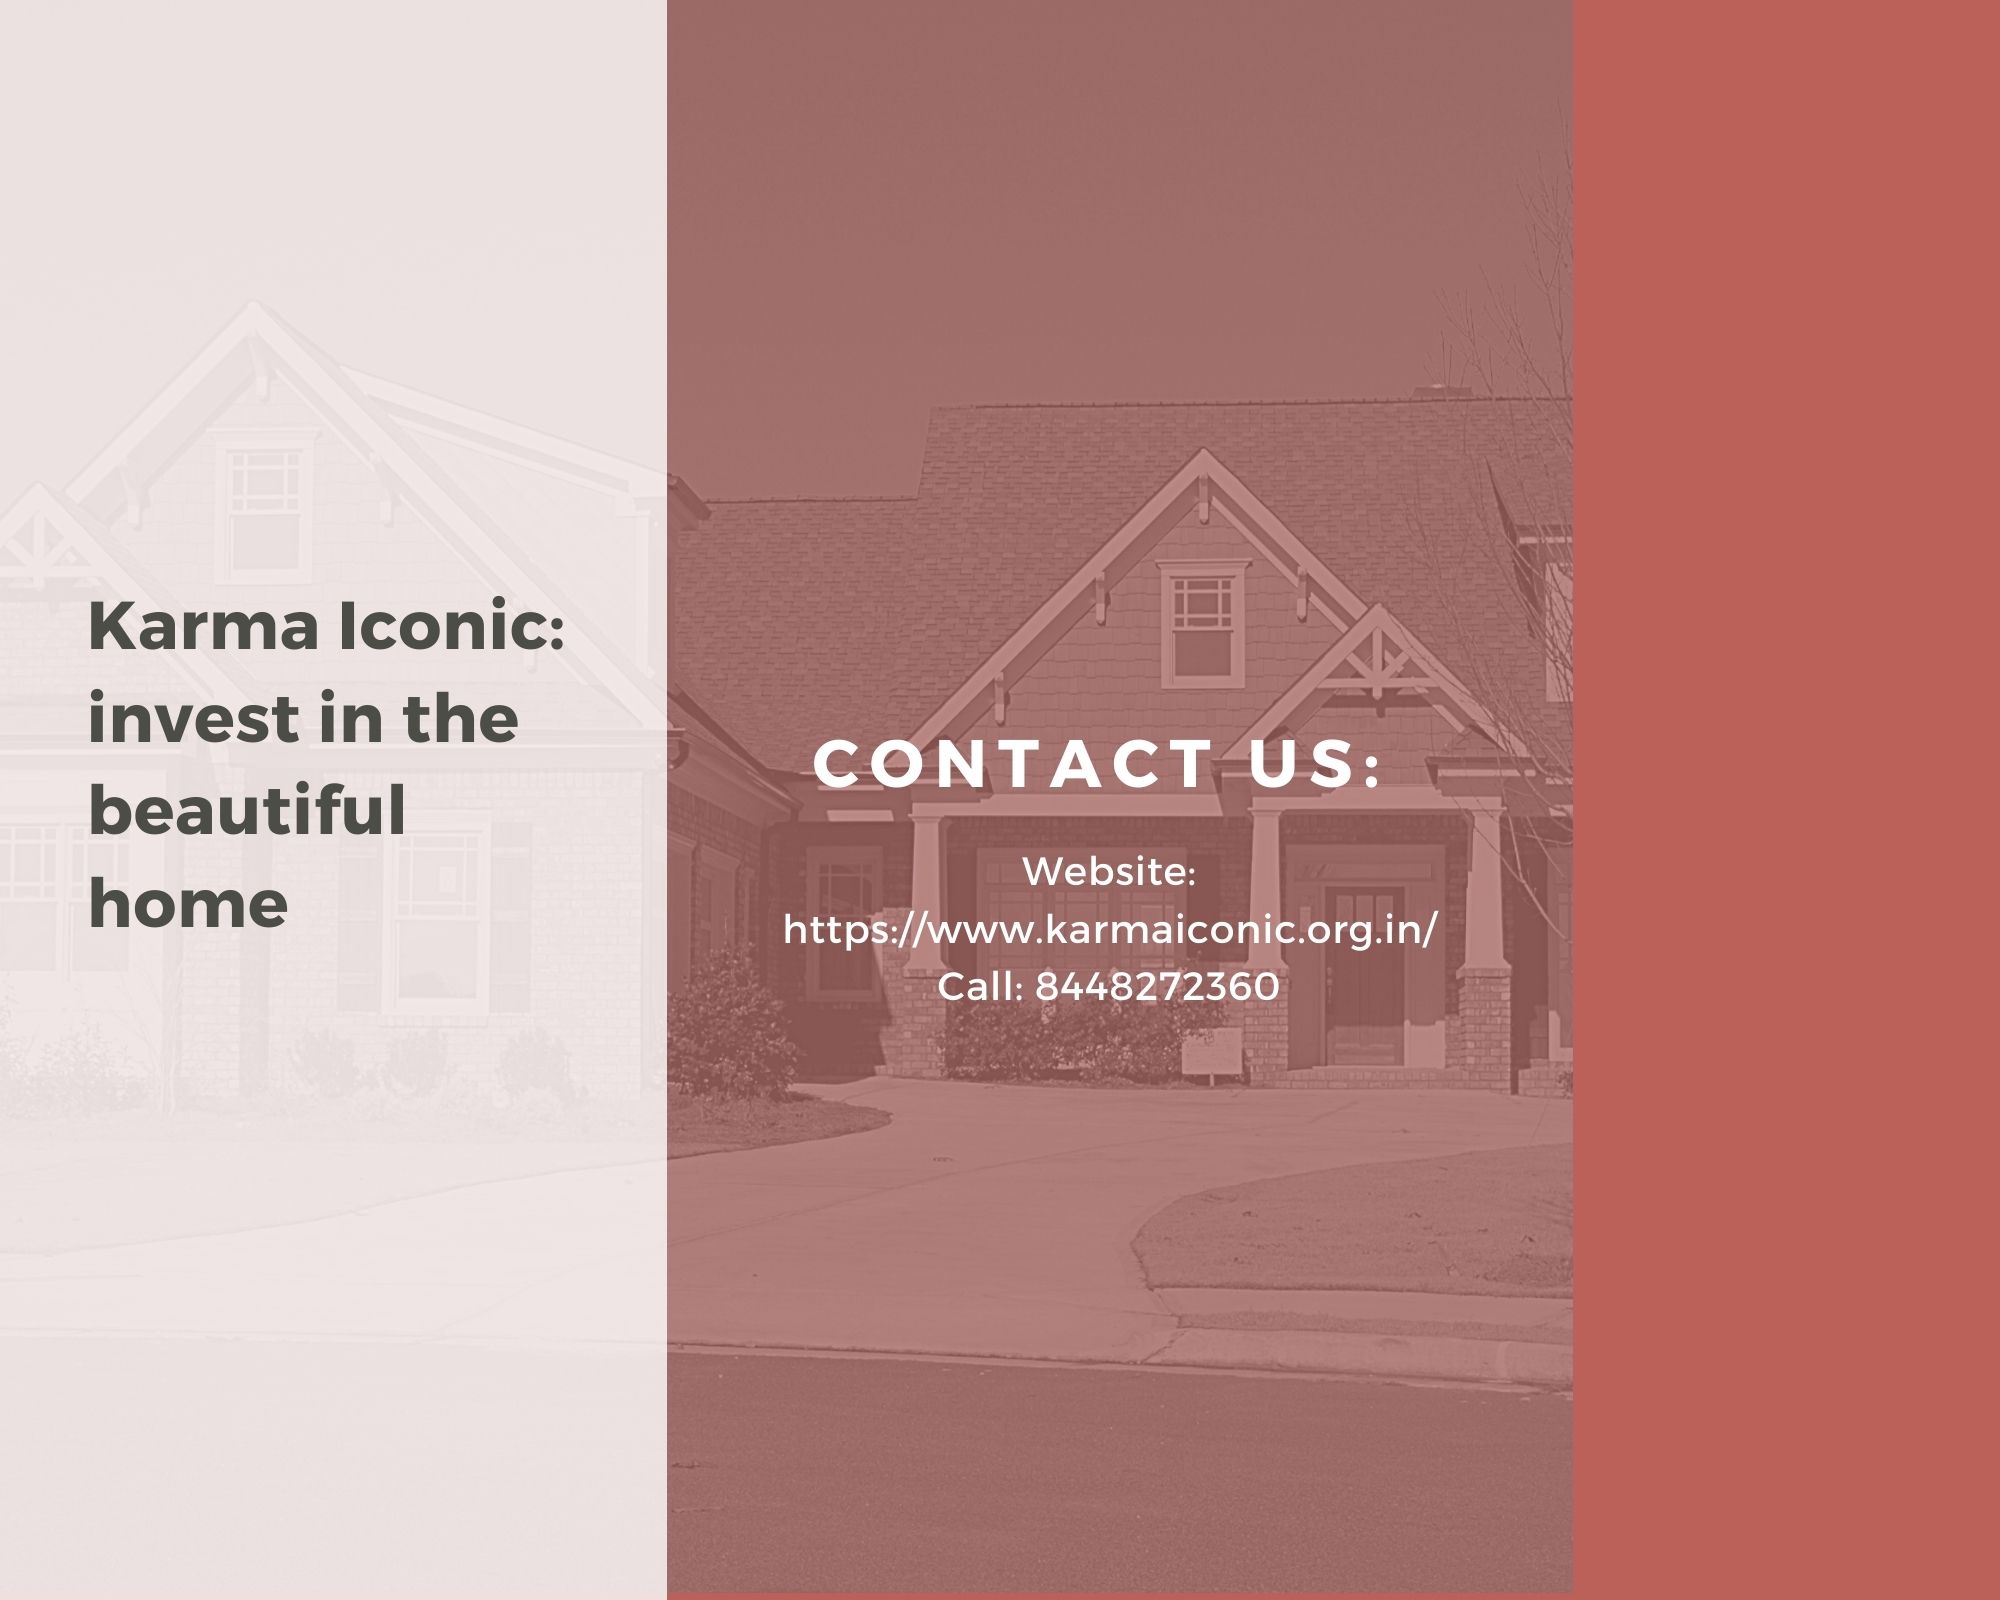 Karma Iconic: invest in the beautiful home